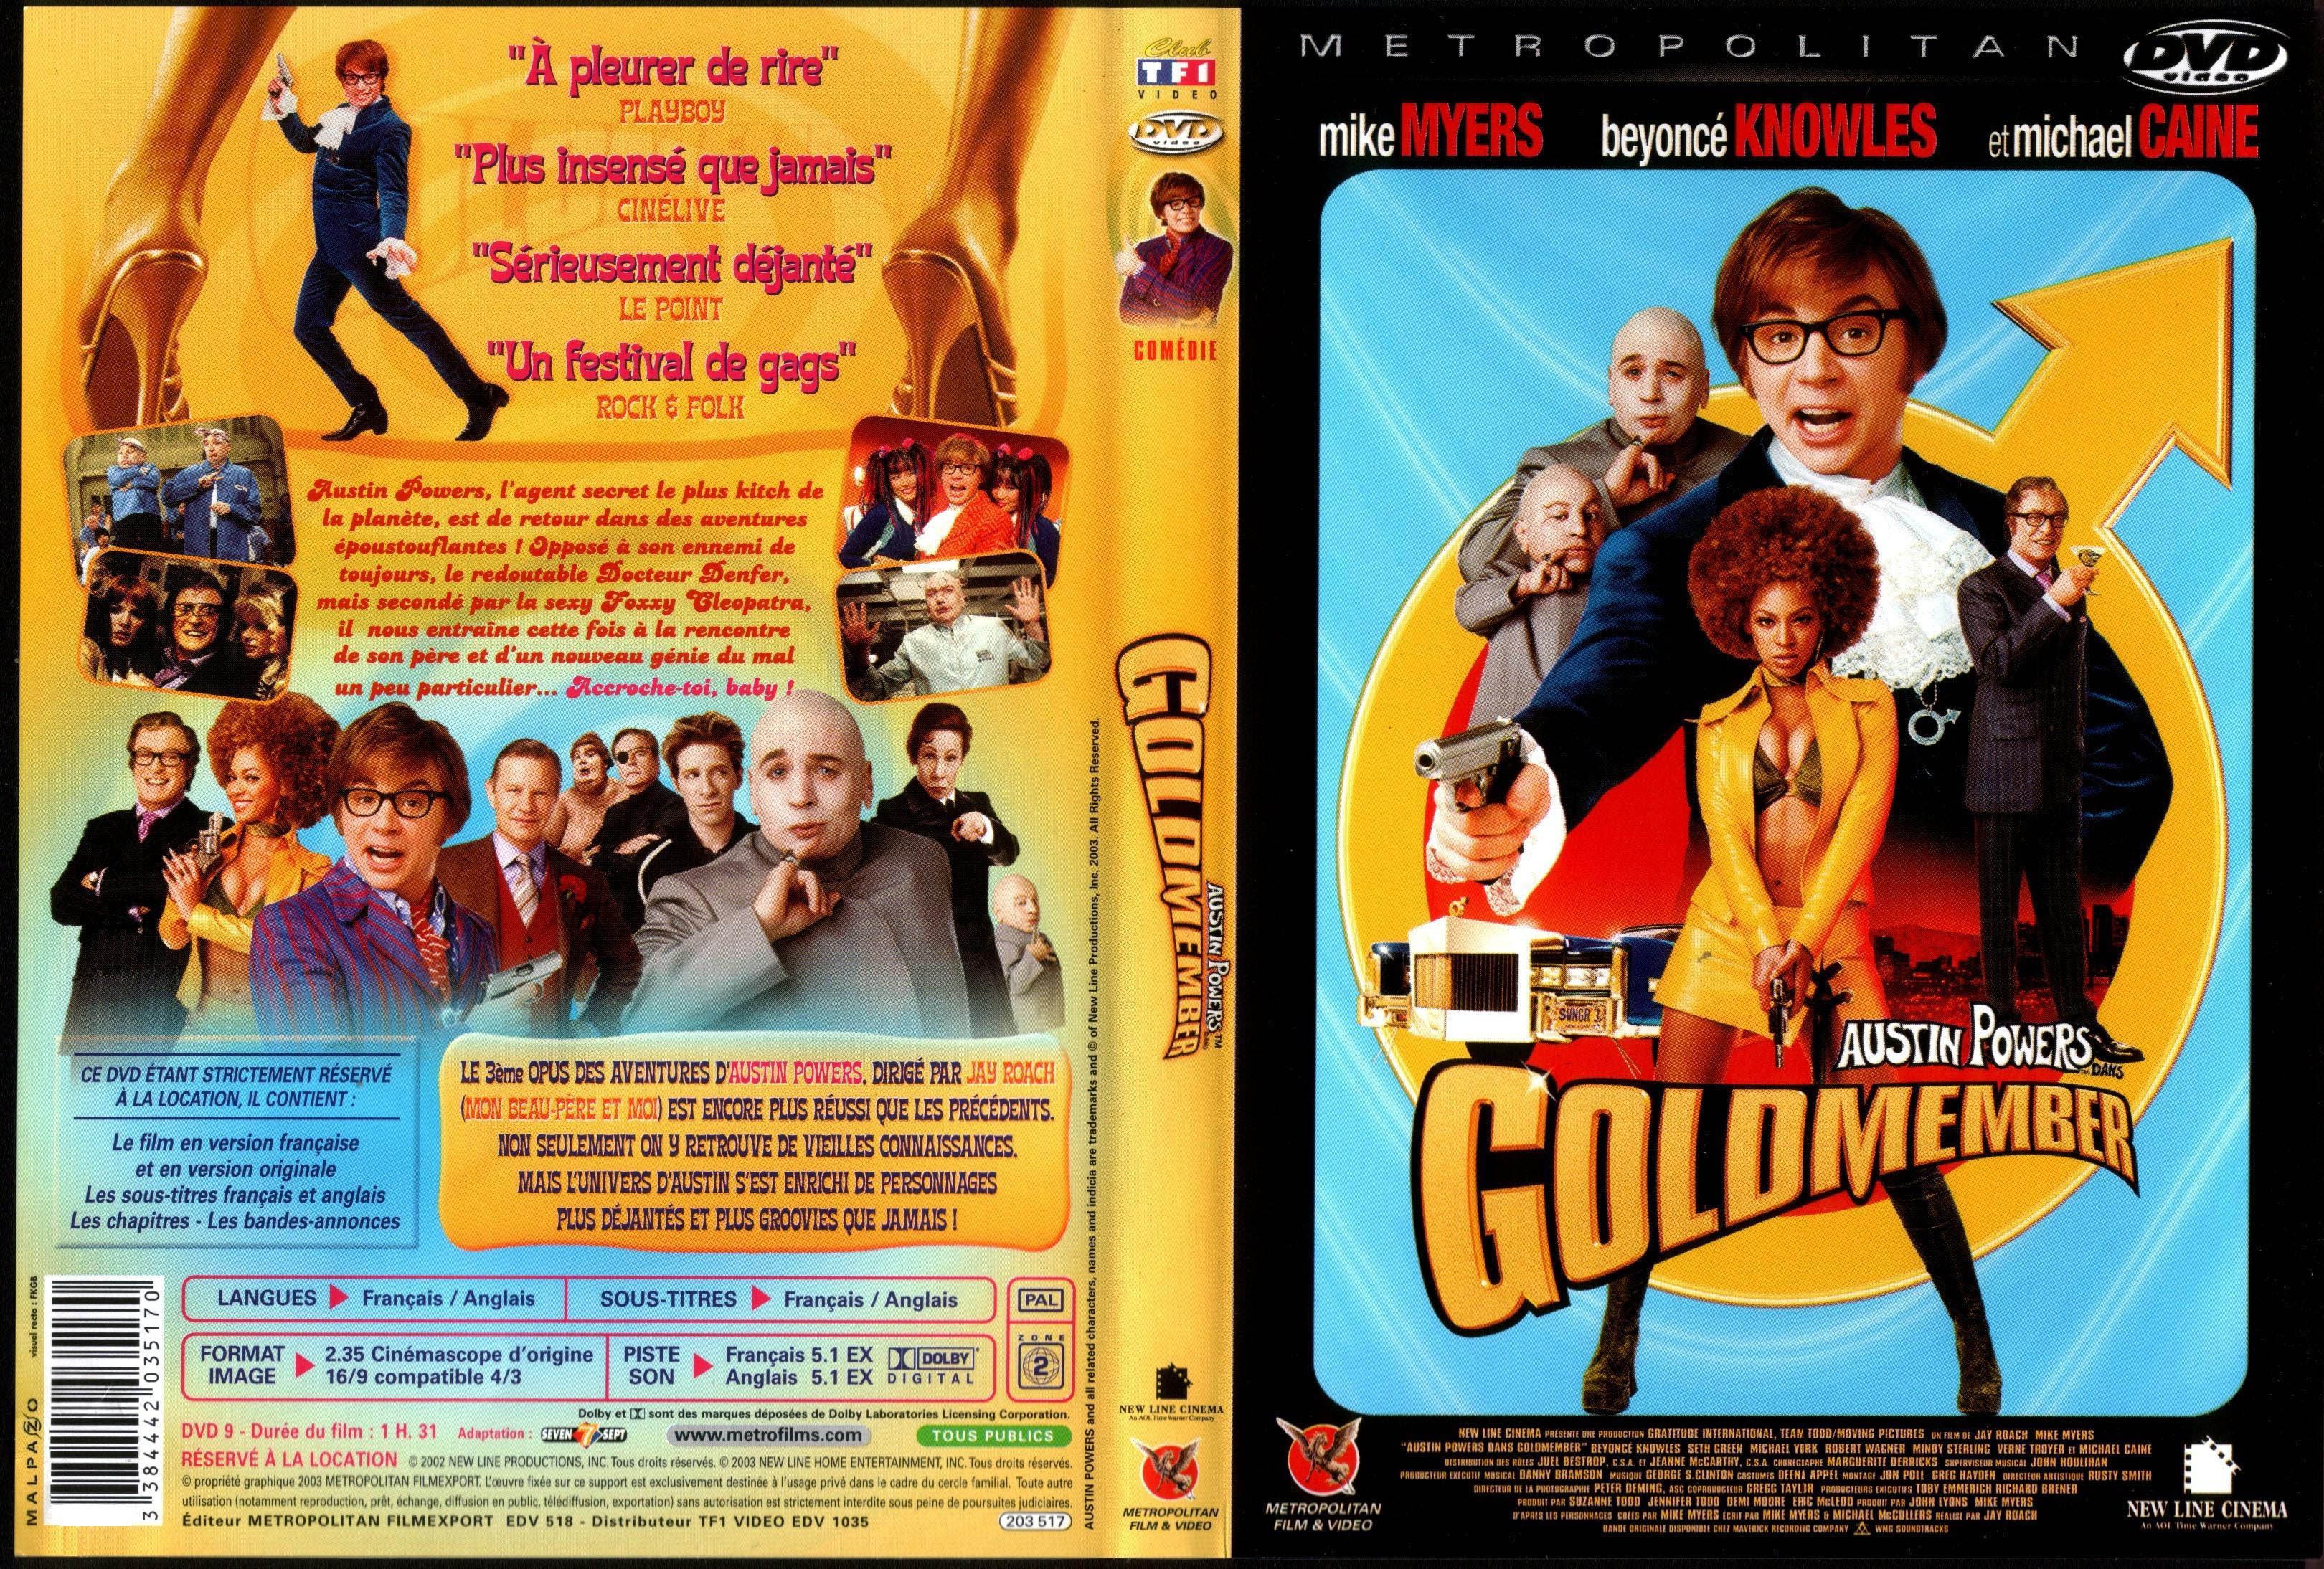 Jaquette DVD Austin Powers in Goldmember